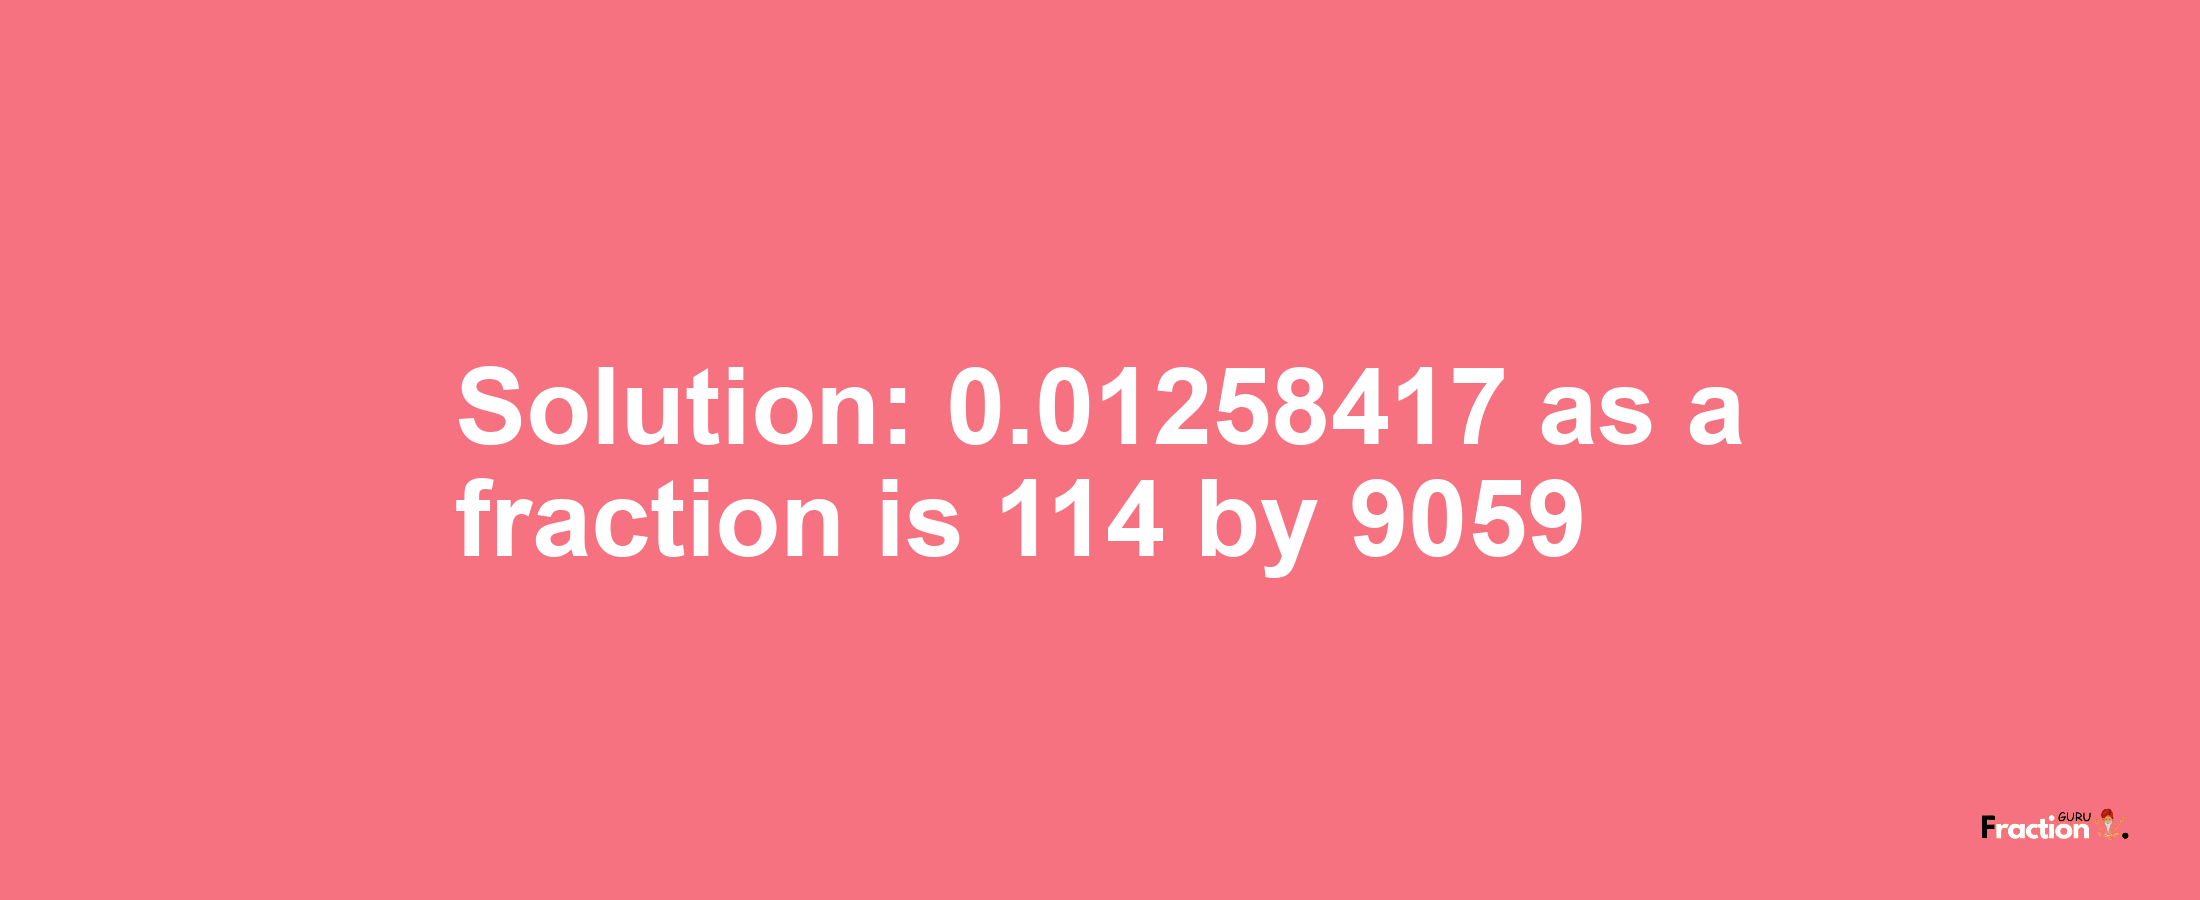 Solution:0.01258417 as a fraction is 114/9059